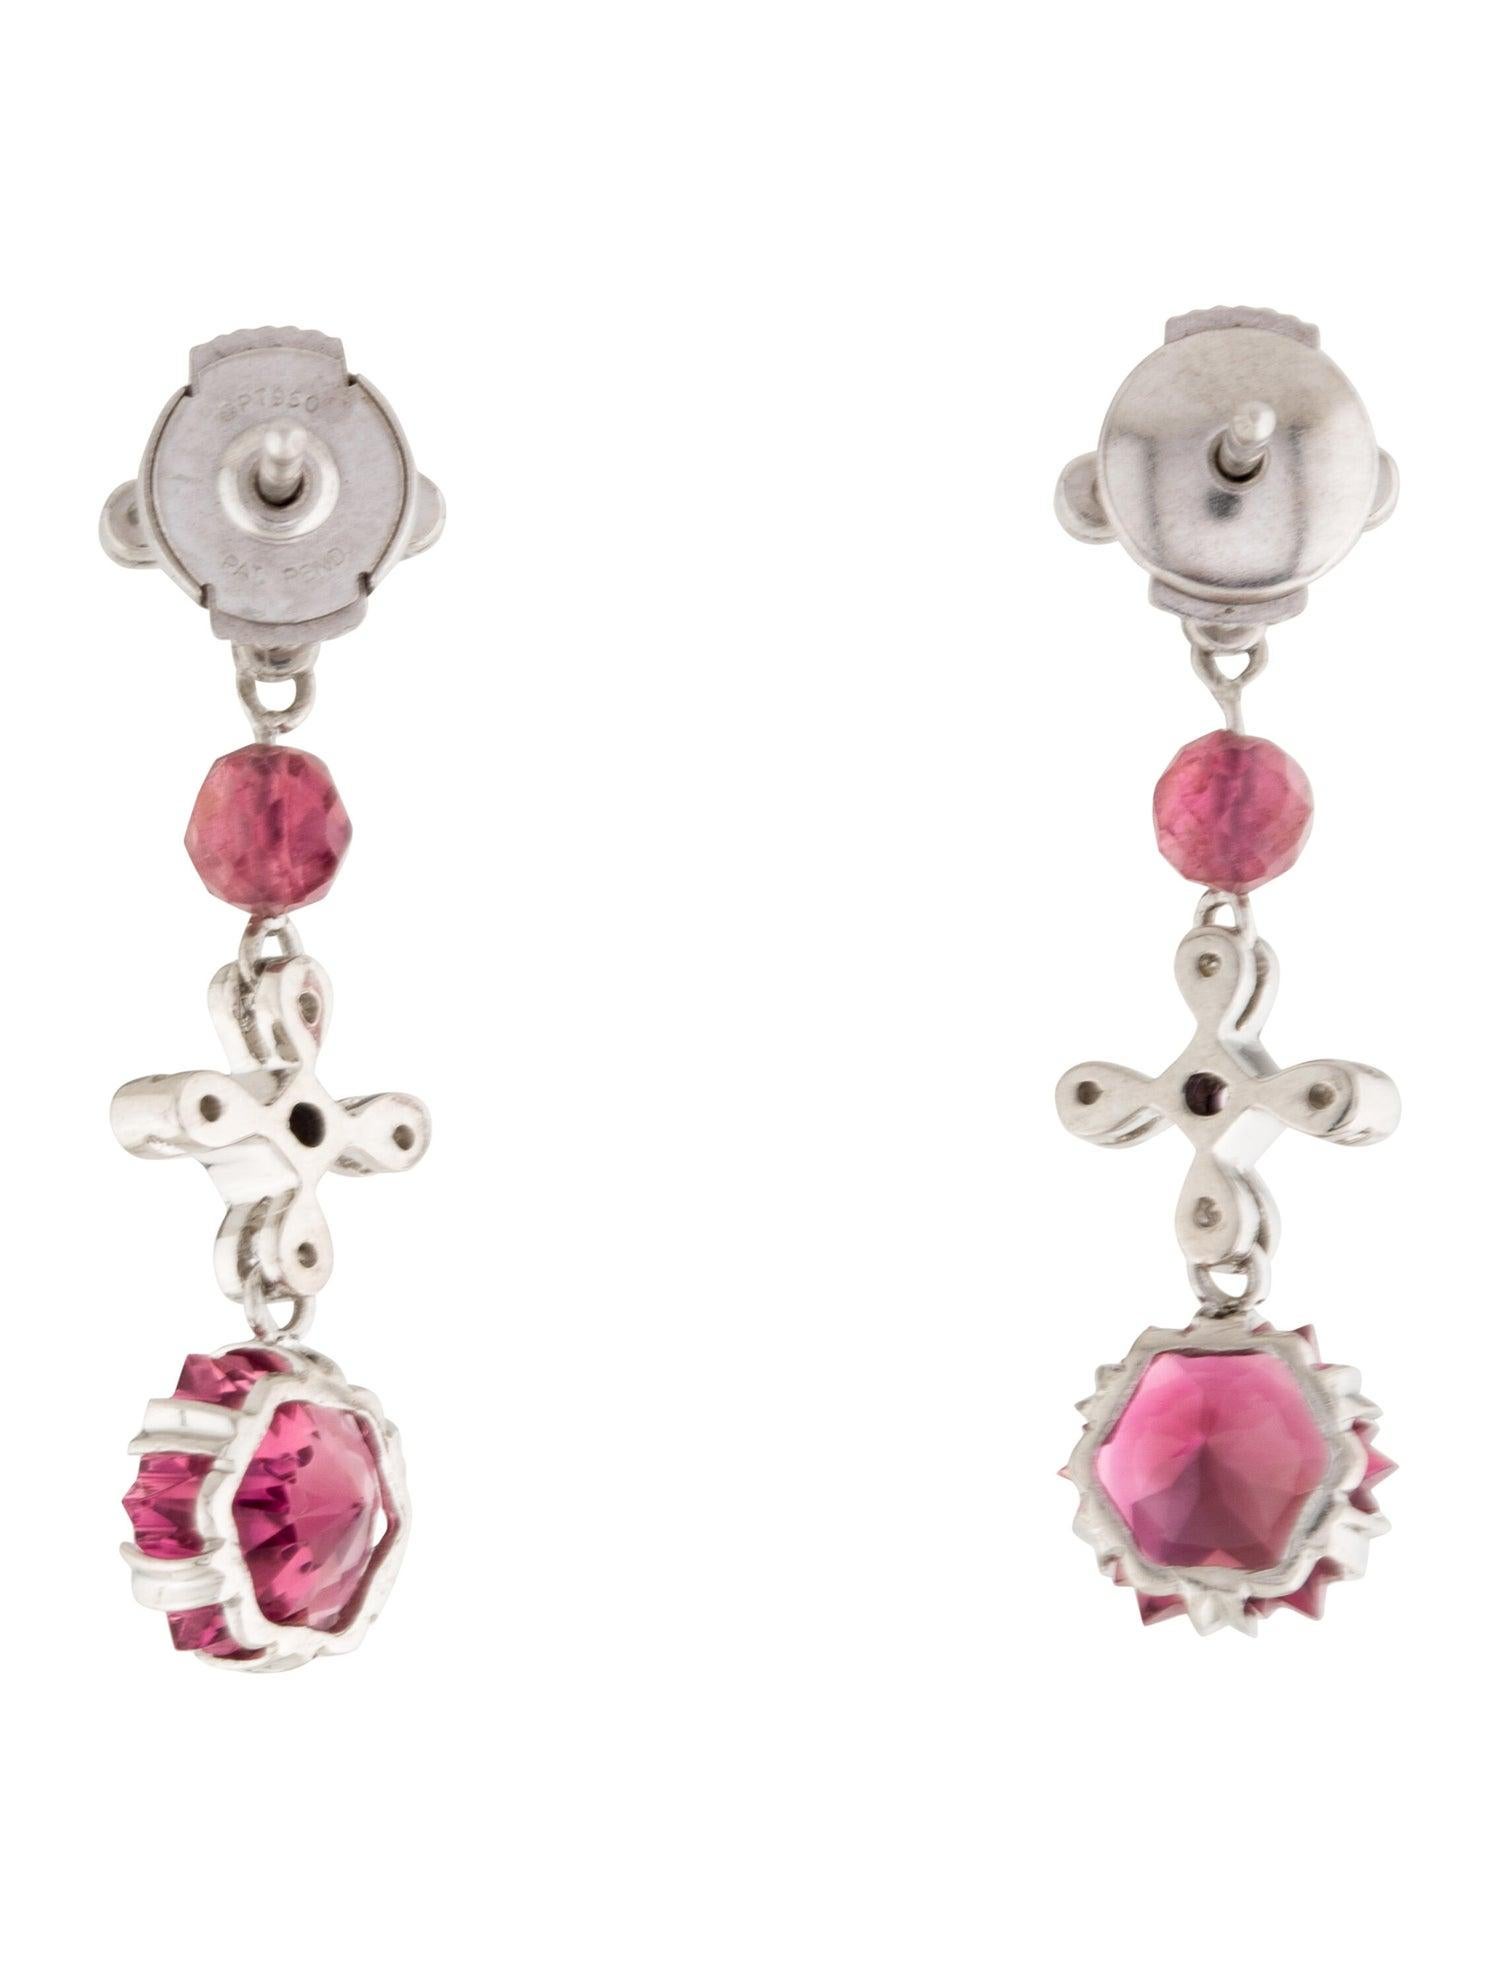 These Tourmaline and Diamond Drop Earrings are a true work of art. The snowflake faceted Tourmaline gemstones are a stunning shade of pink, and the .08cts of round brilliant diamonds add the perfect touch of sparkle. These earrings are set in